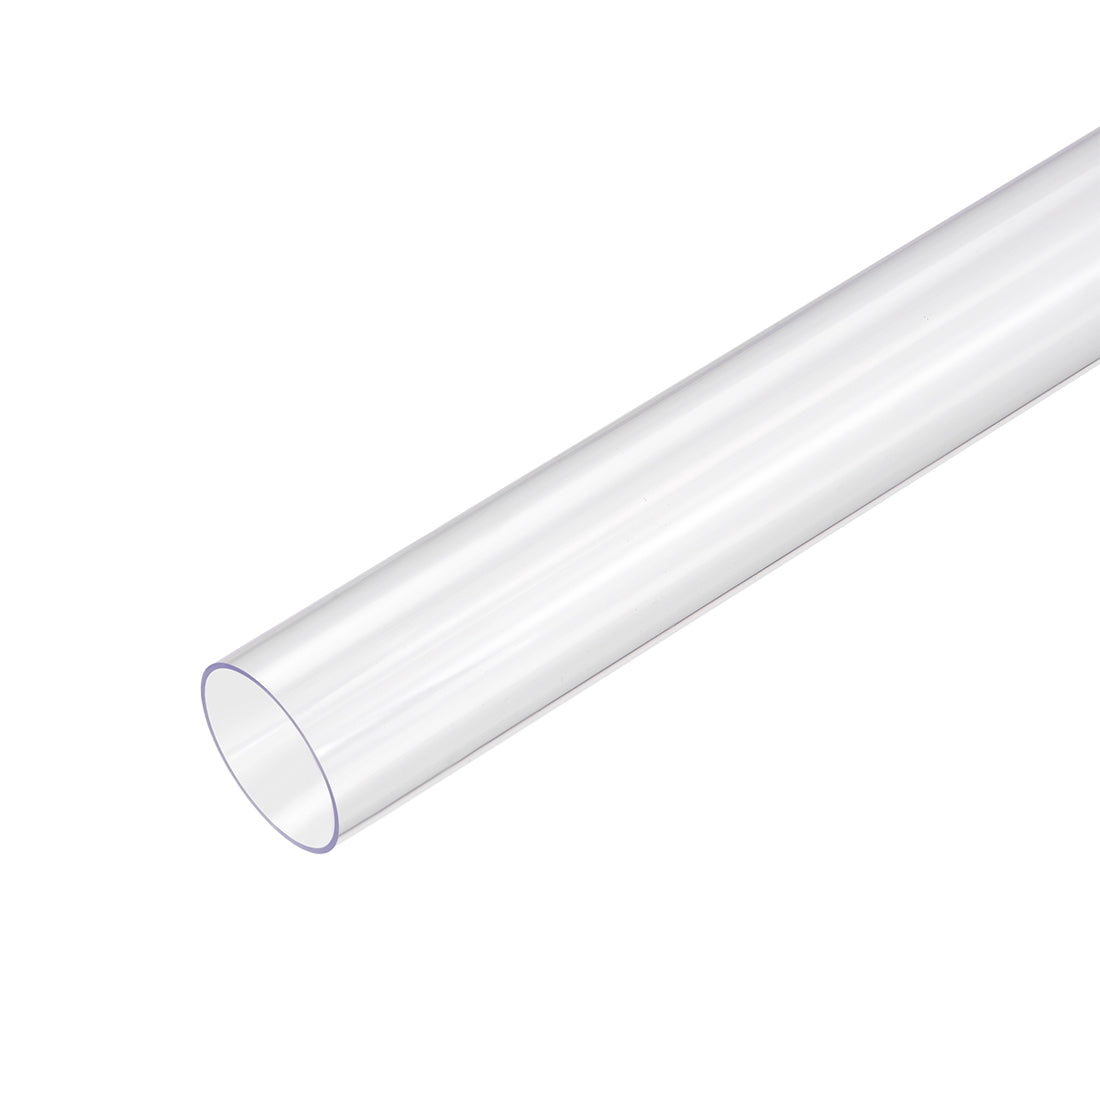 uxcell Uxcell PVC Rigid Round Tubing,Clear,30mm ID x 32mm OD,0.5M/1.64Ft Length,2pcs